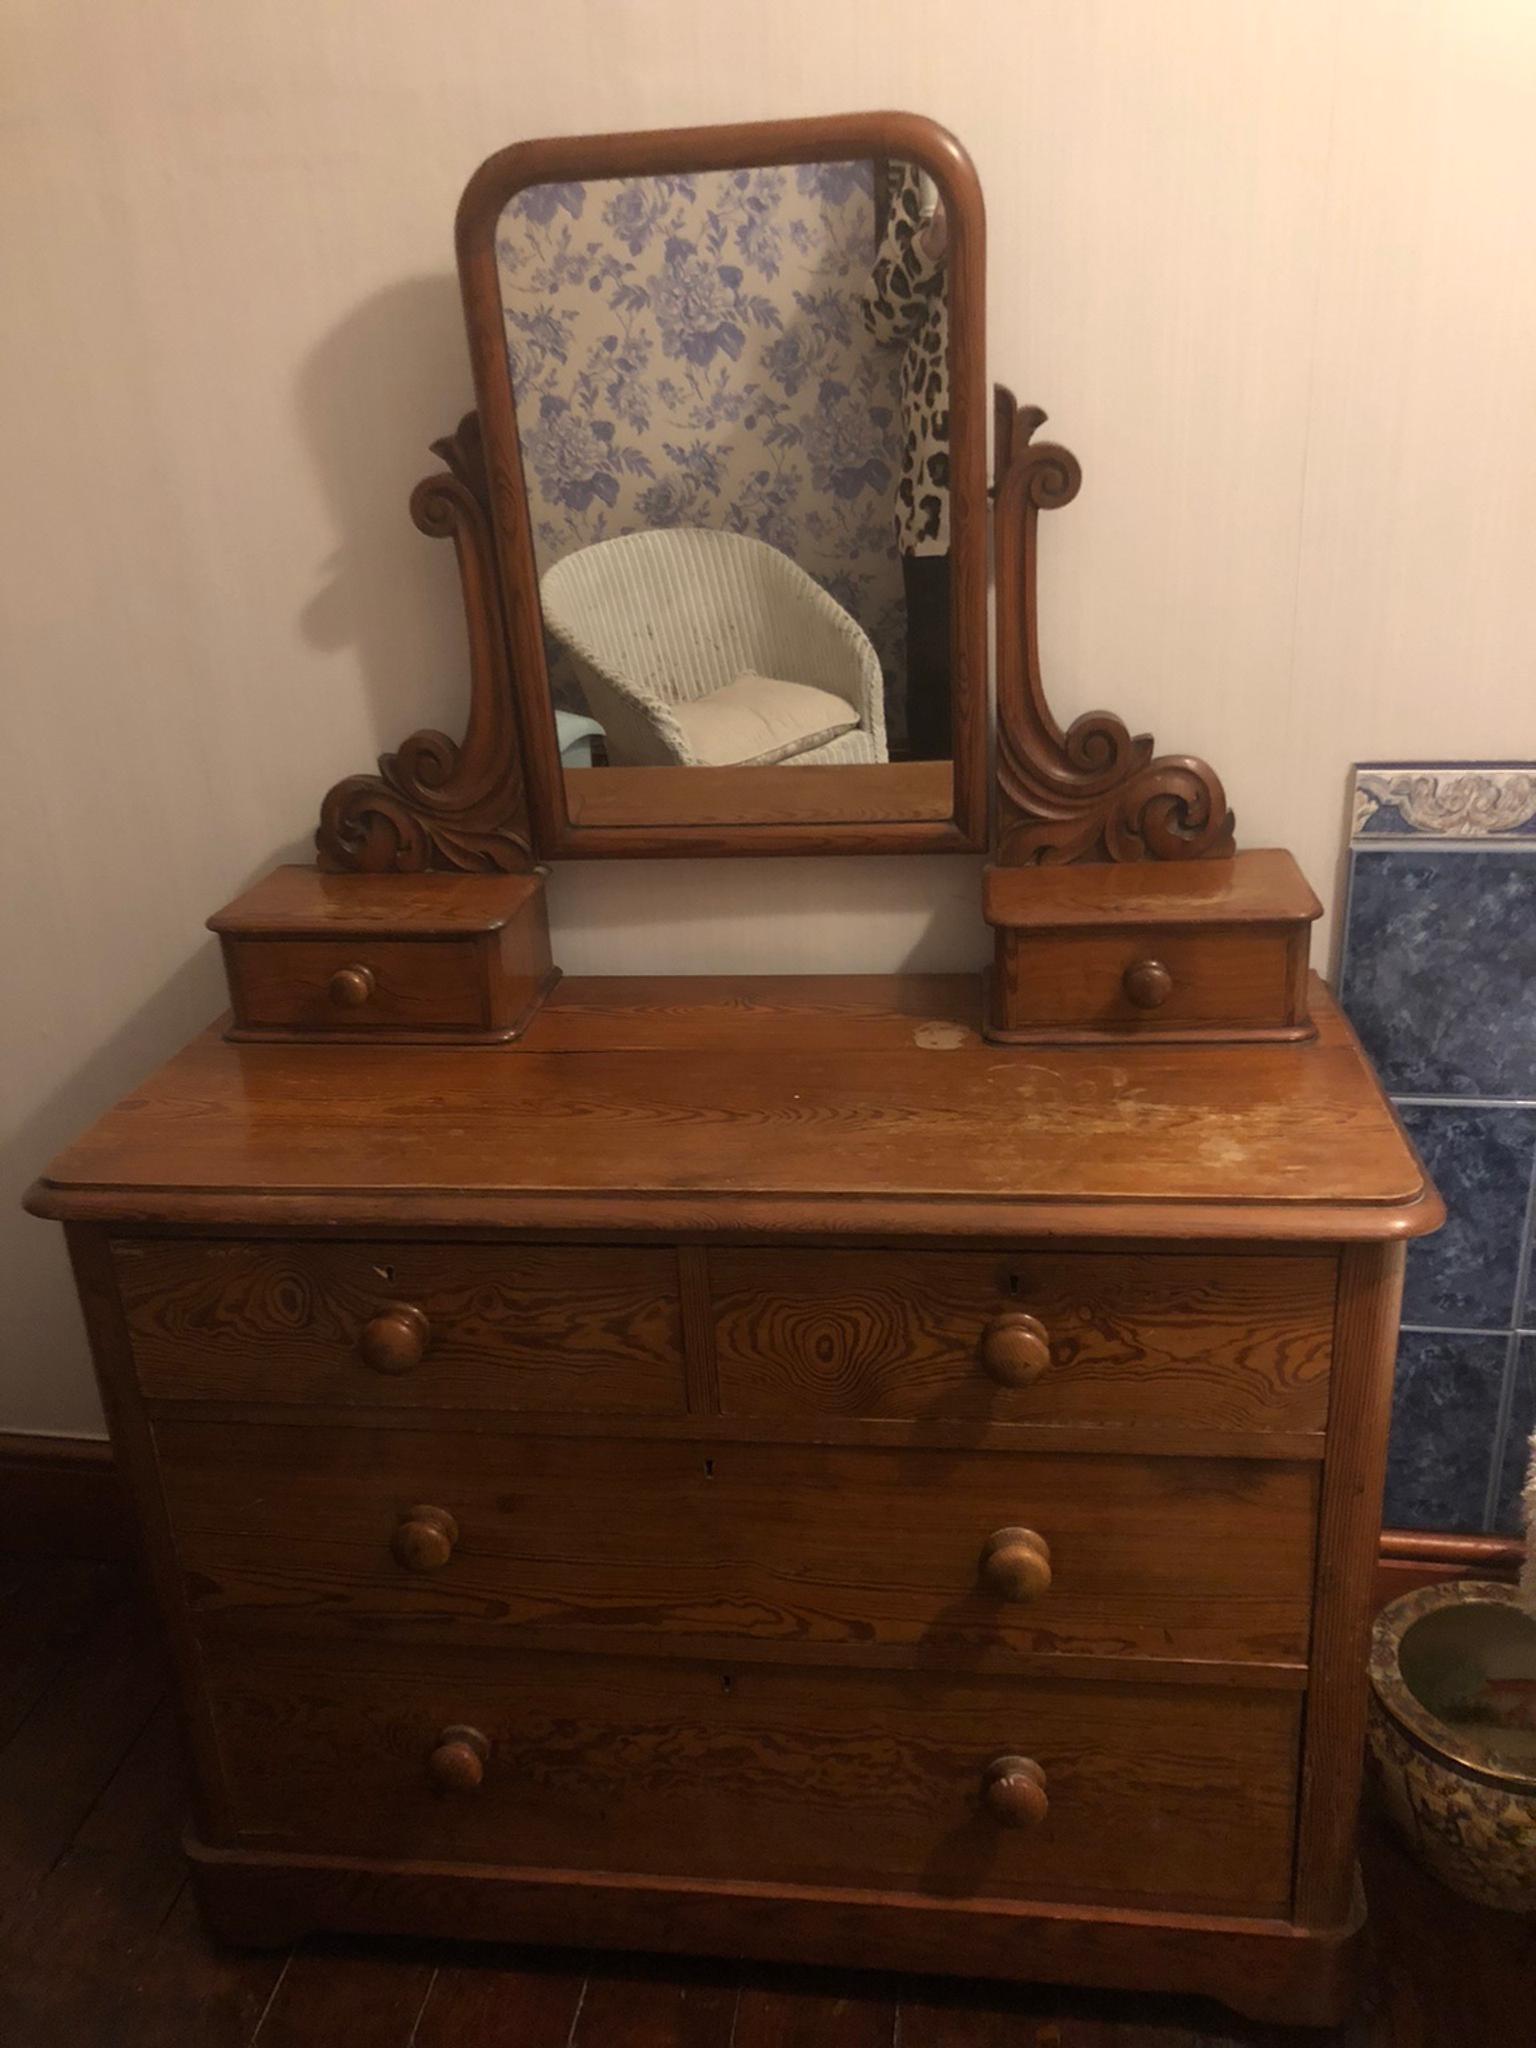 Antique Dresser With Tilt Mirror In Wigan For 200 00 For Sale